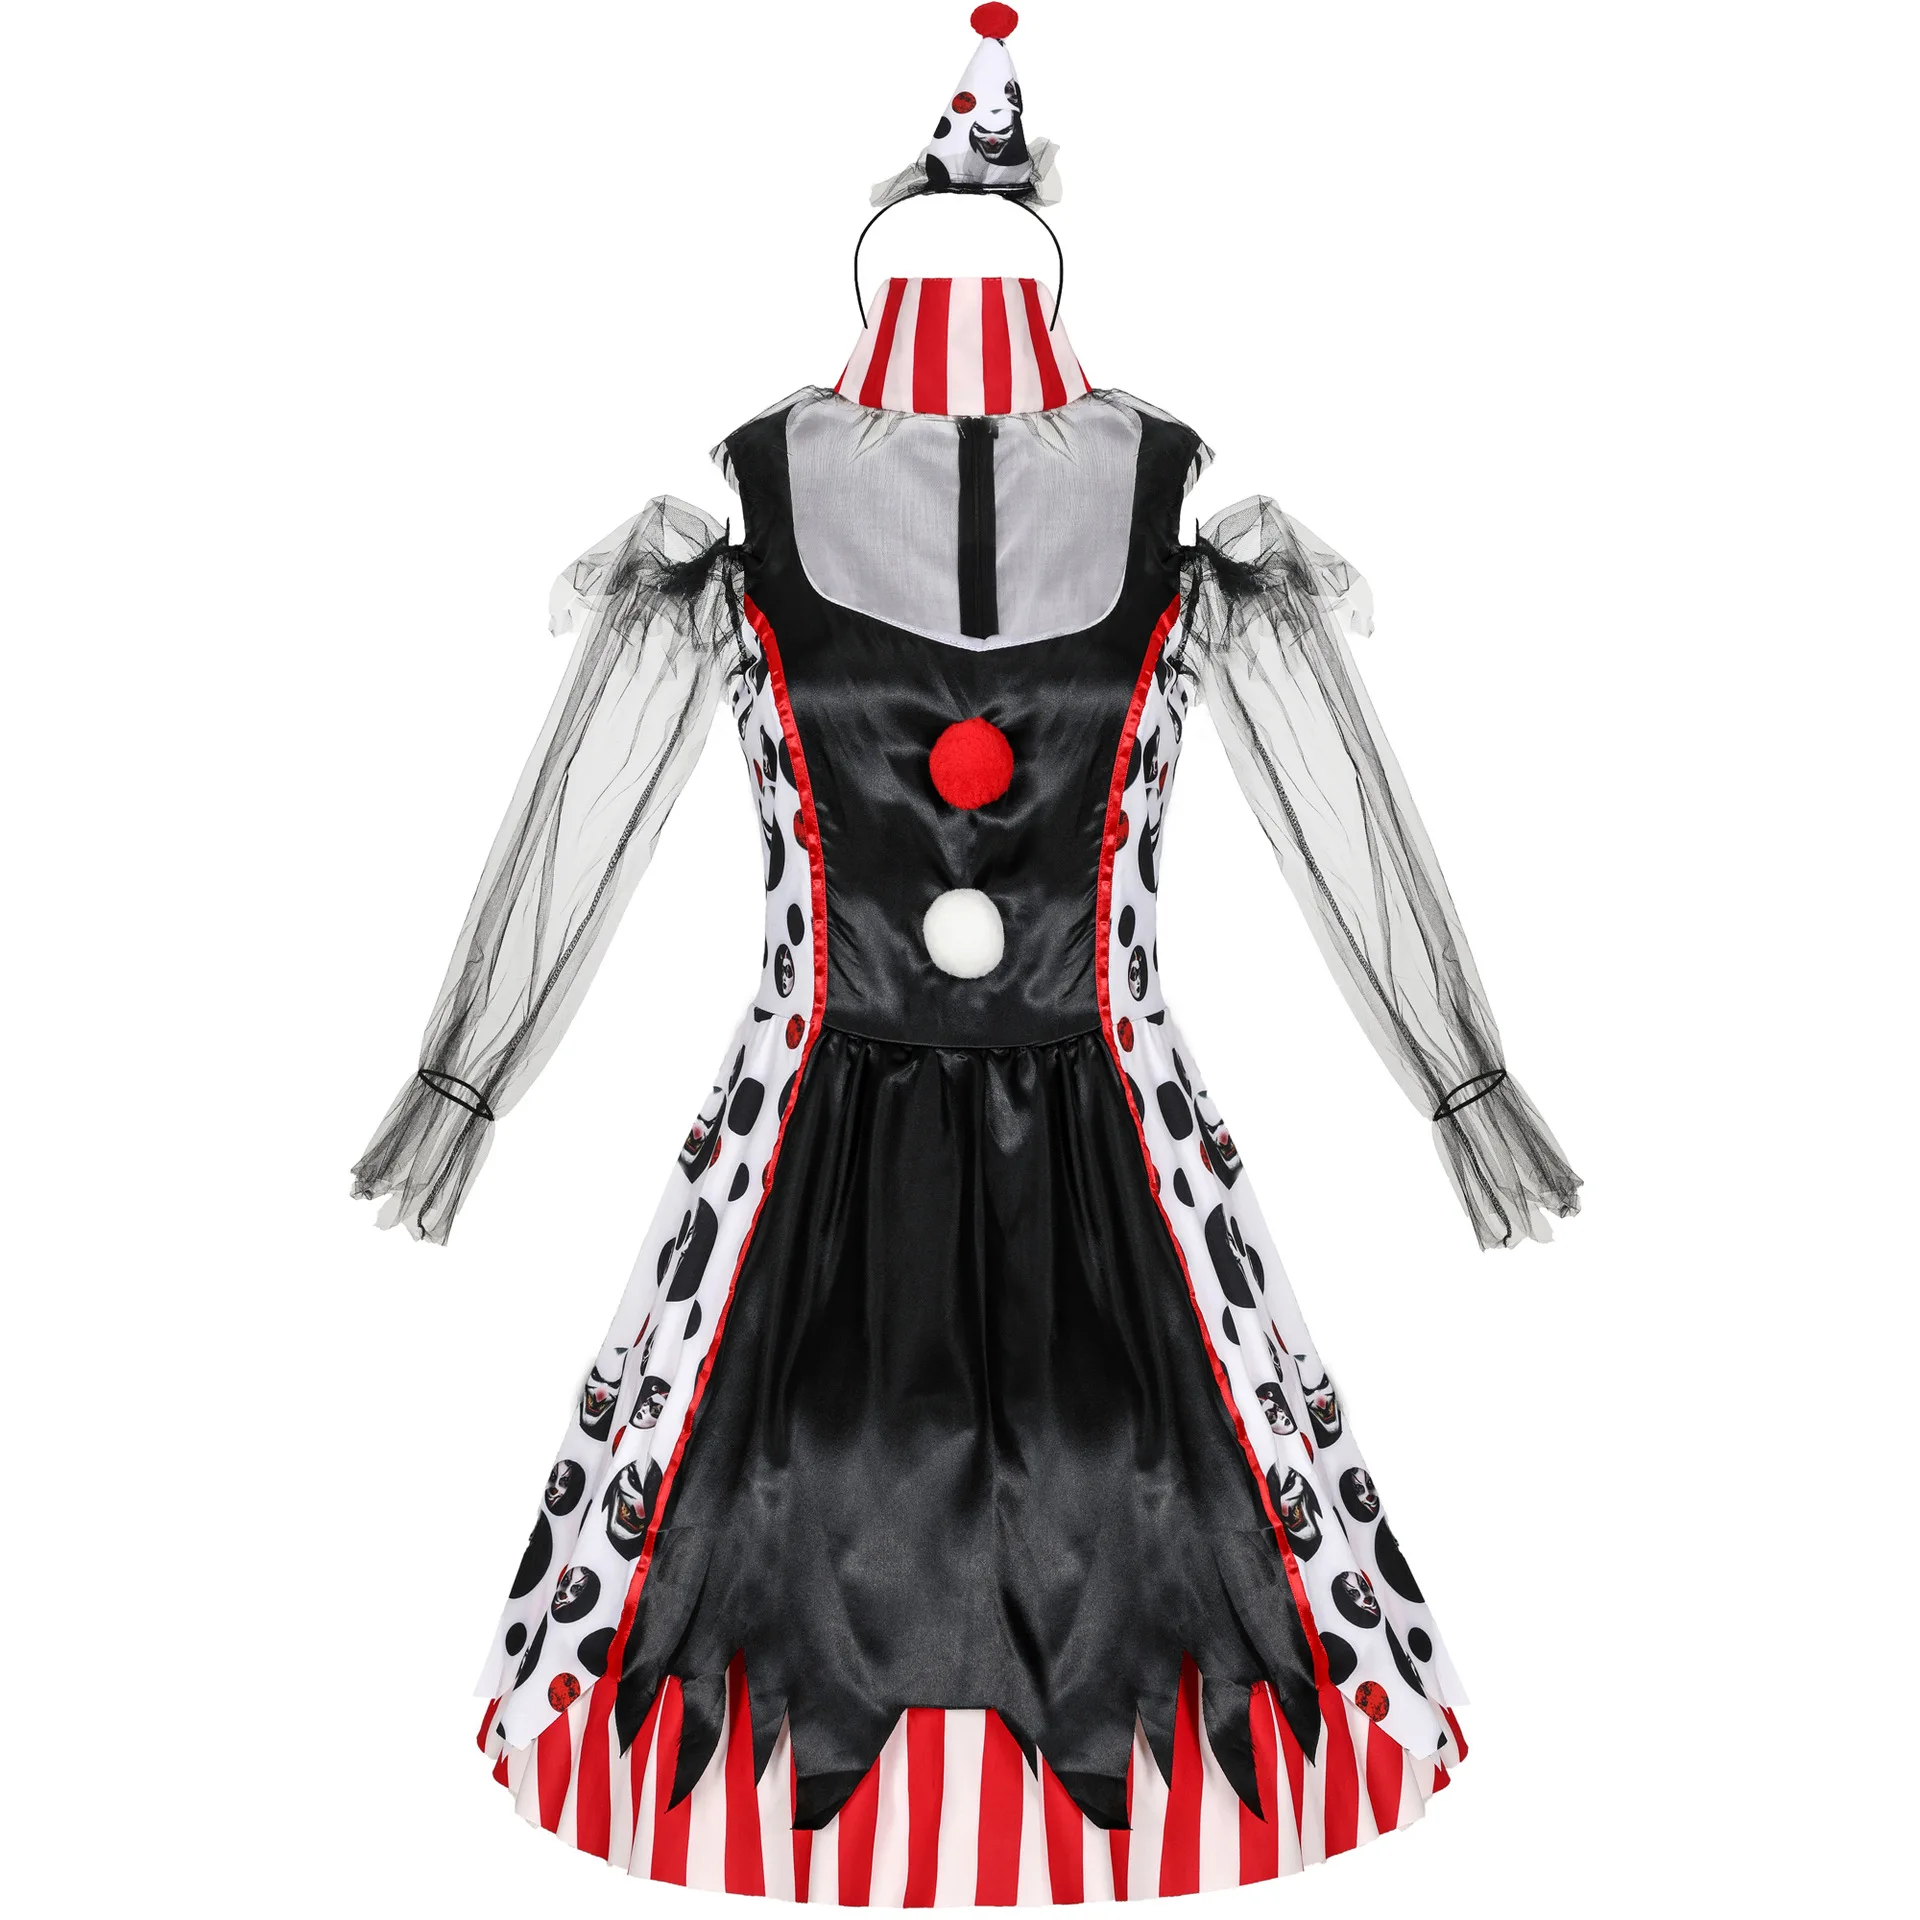 Women Evil Clown Joker Costumes Cosplay Woman Halloween Carnival Purim Funny Party Dress Up Adult Female Uniform images - 6